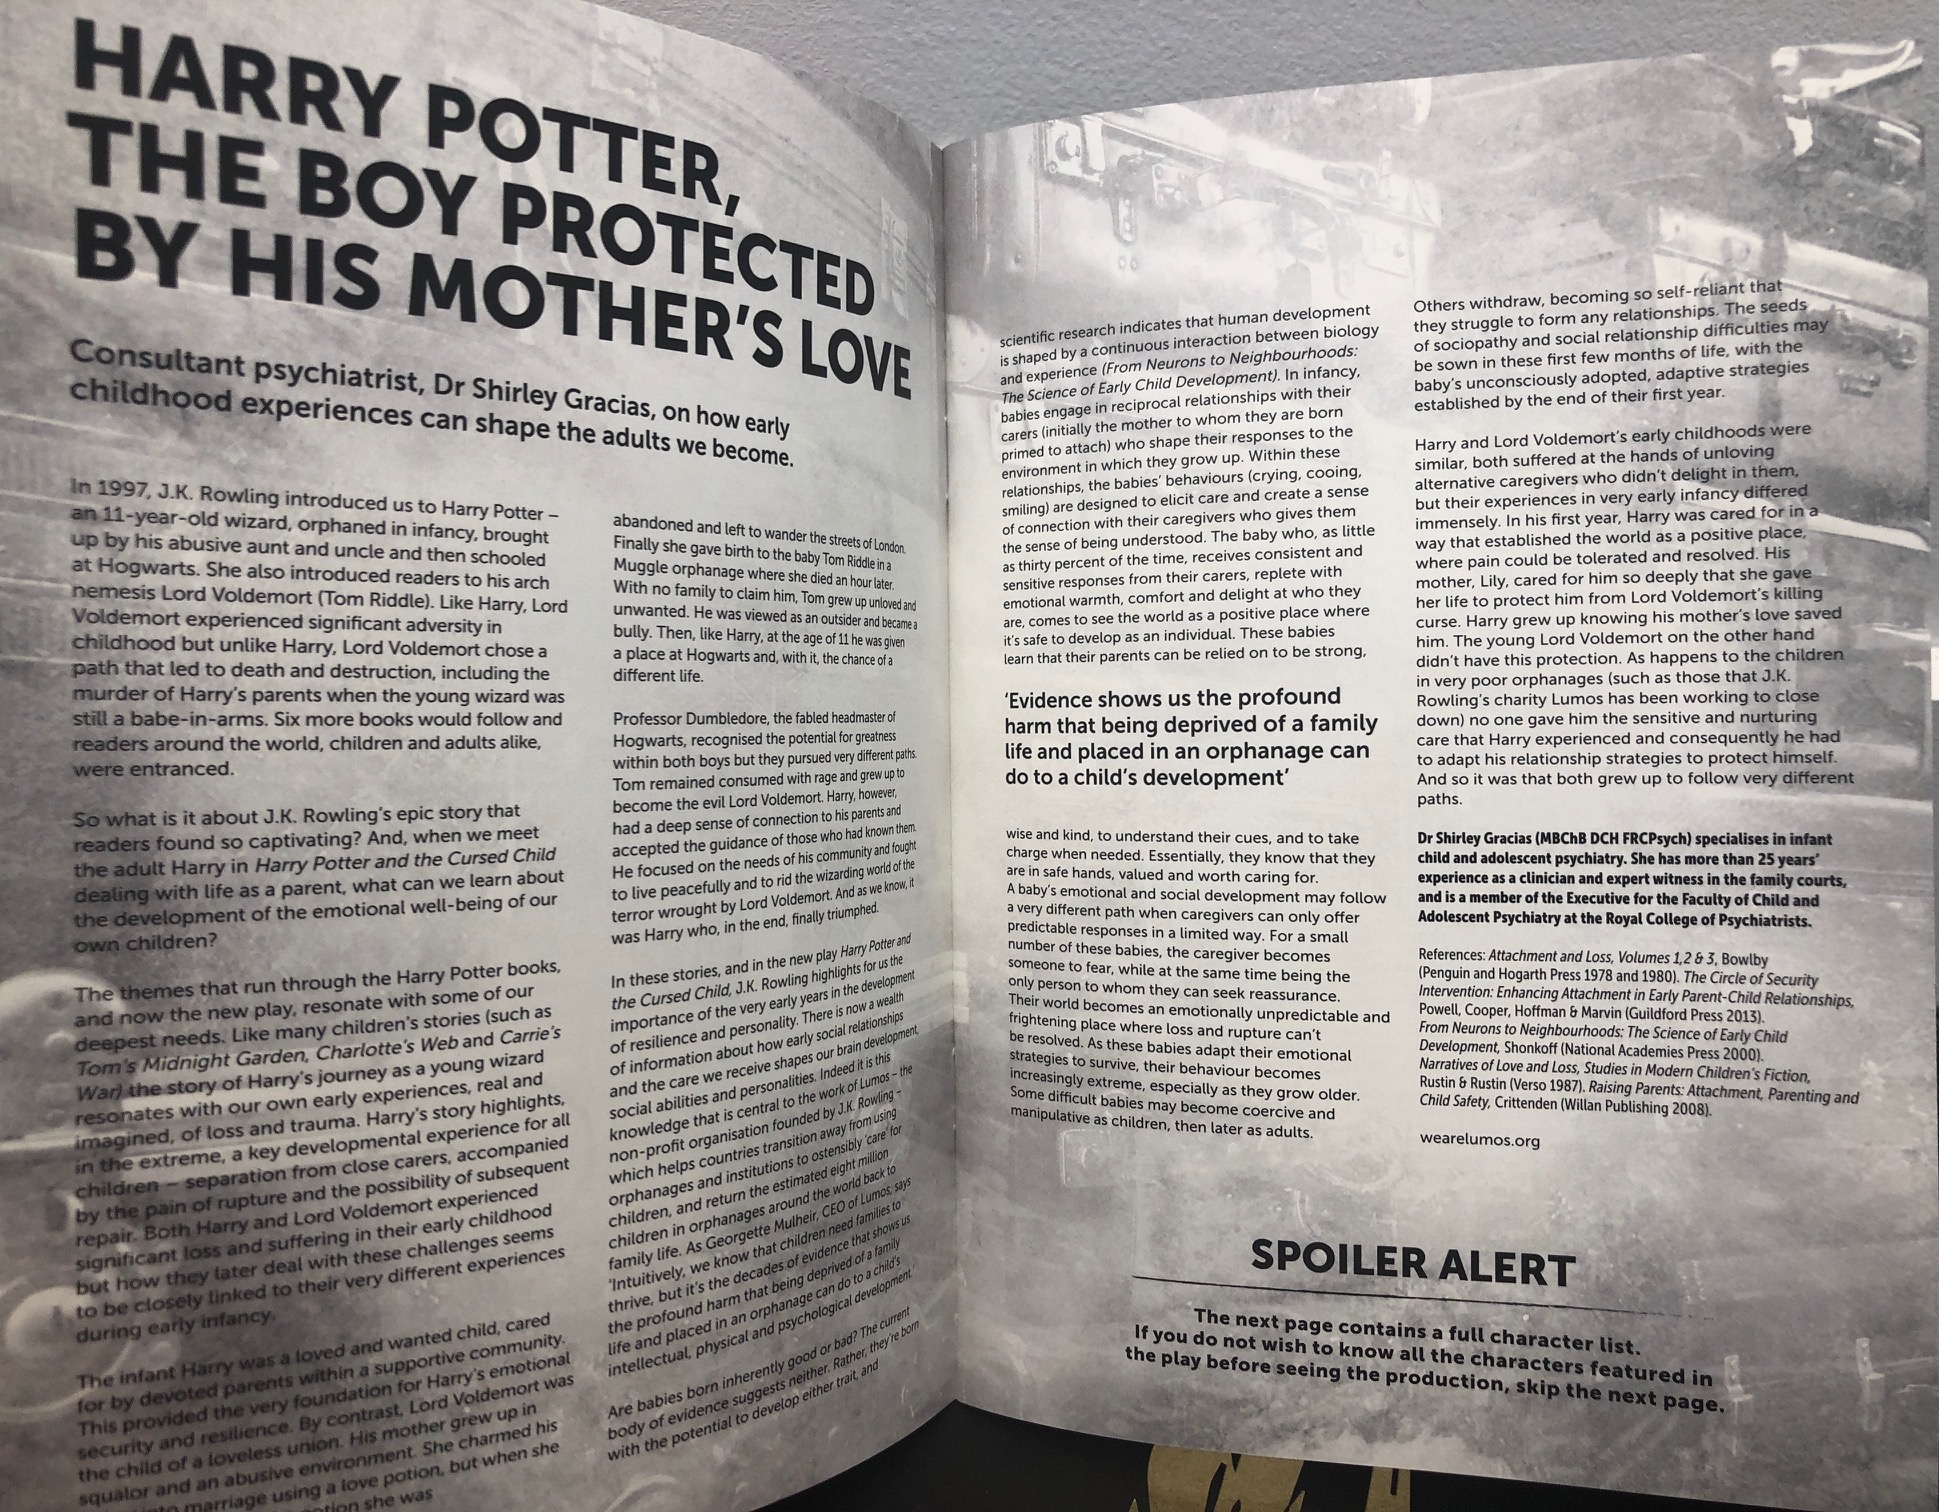 Article included in the “Harry Potter and the Cursed Child” souvenir brochure and programs from the Melbourne, Australia, premiere on February 22, 2019